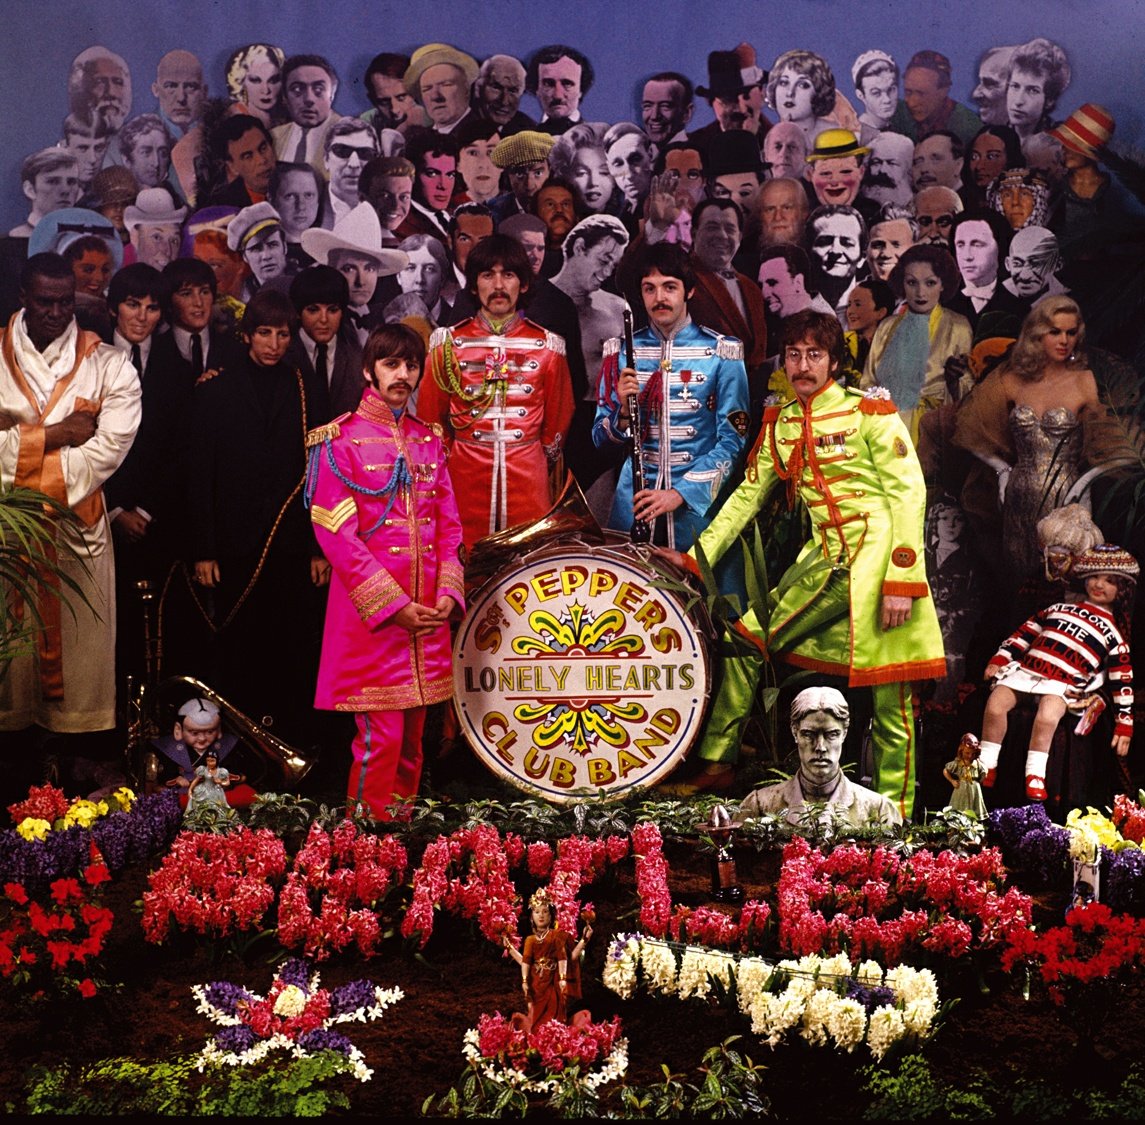 On the 53rd Anniversary of the release of 'Sgt. Pepper's Lonely Hearts Club Band', here is a thread about the celebrities featured on the album cover and why The Beatles chose those people.